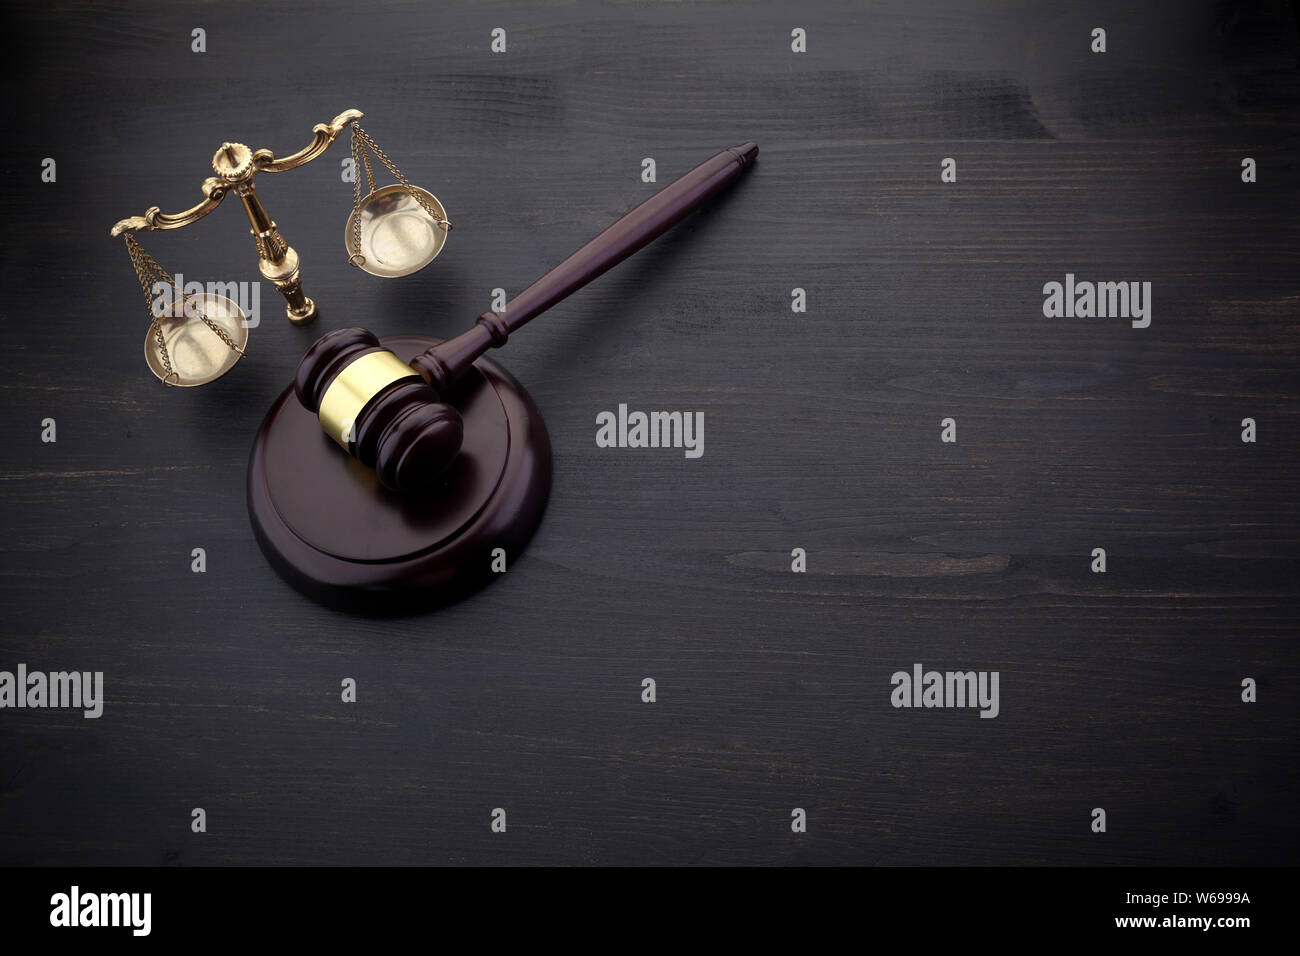 Judges Gavel And Scale Of Justice On The Black Table Background. Law Concept. Stock Photo